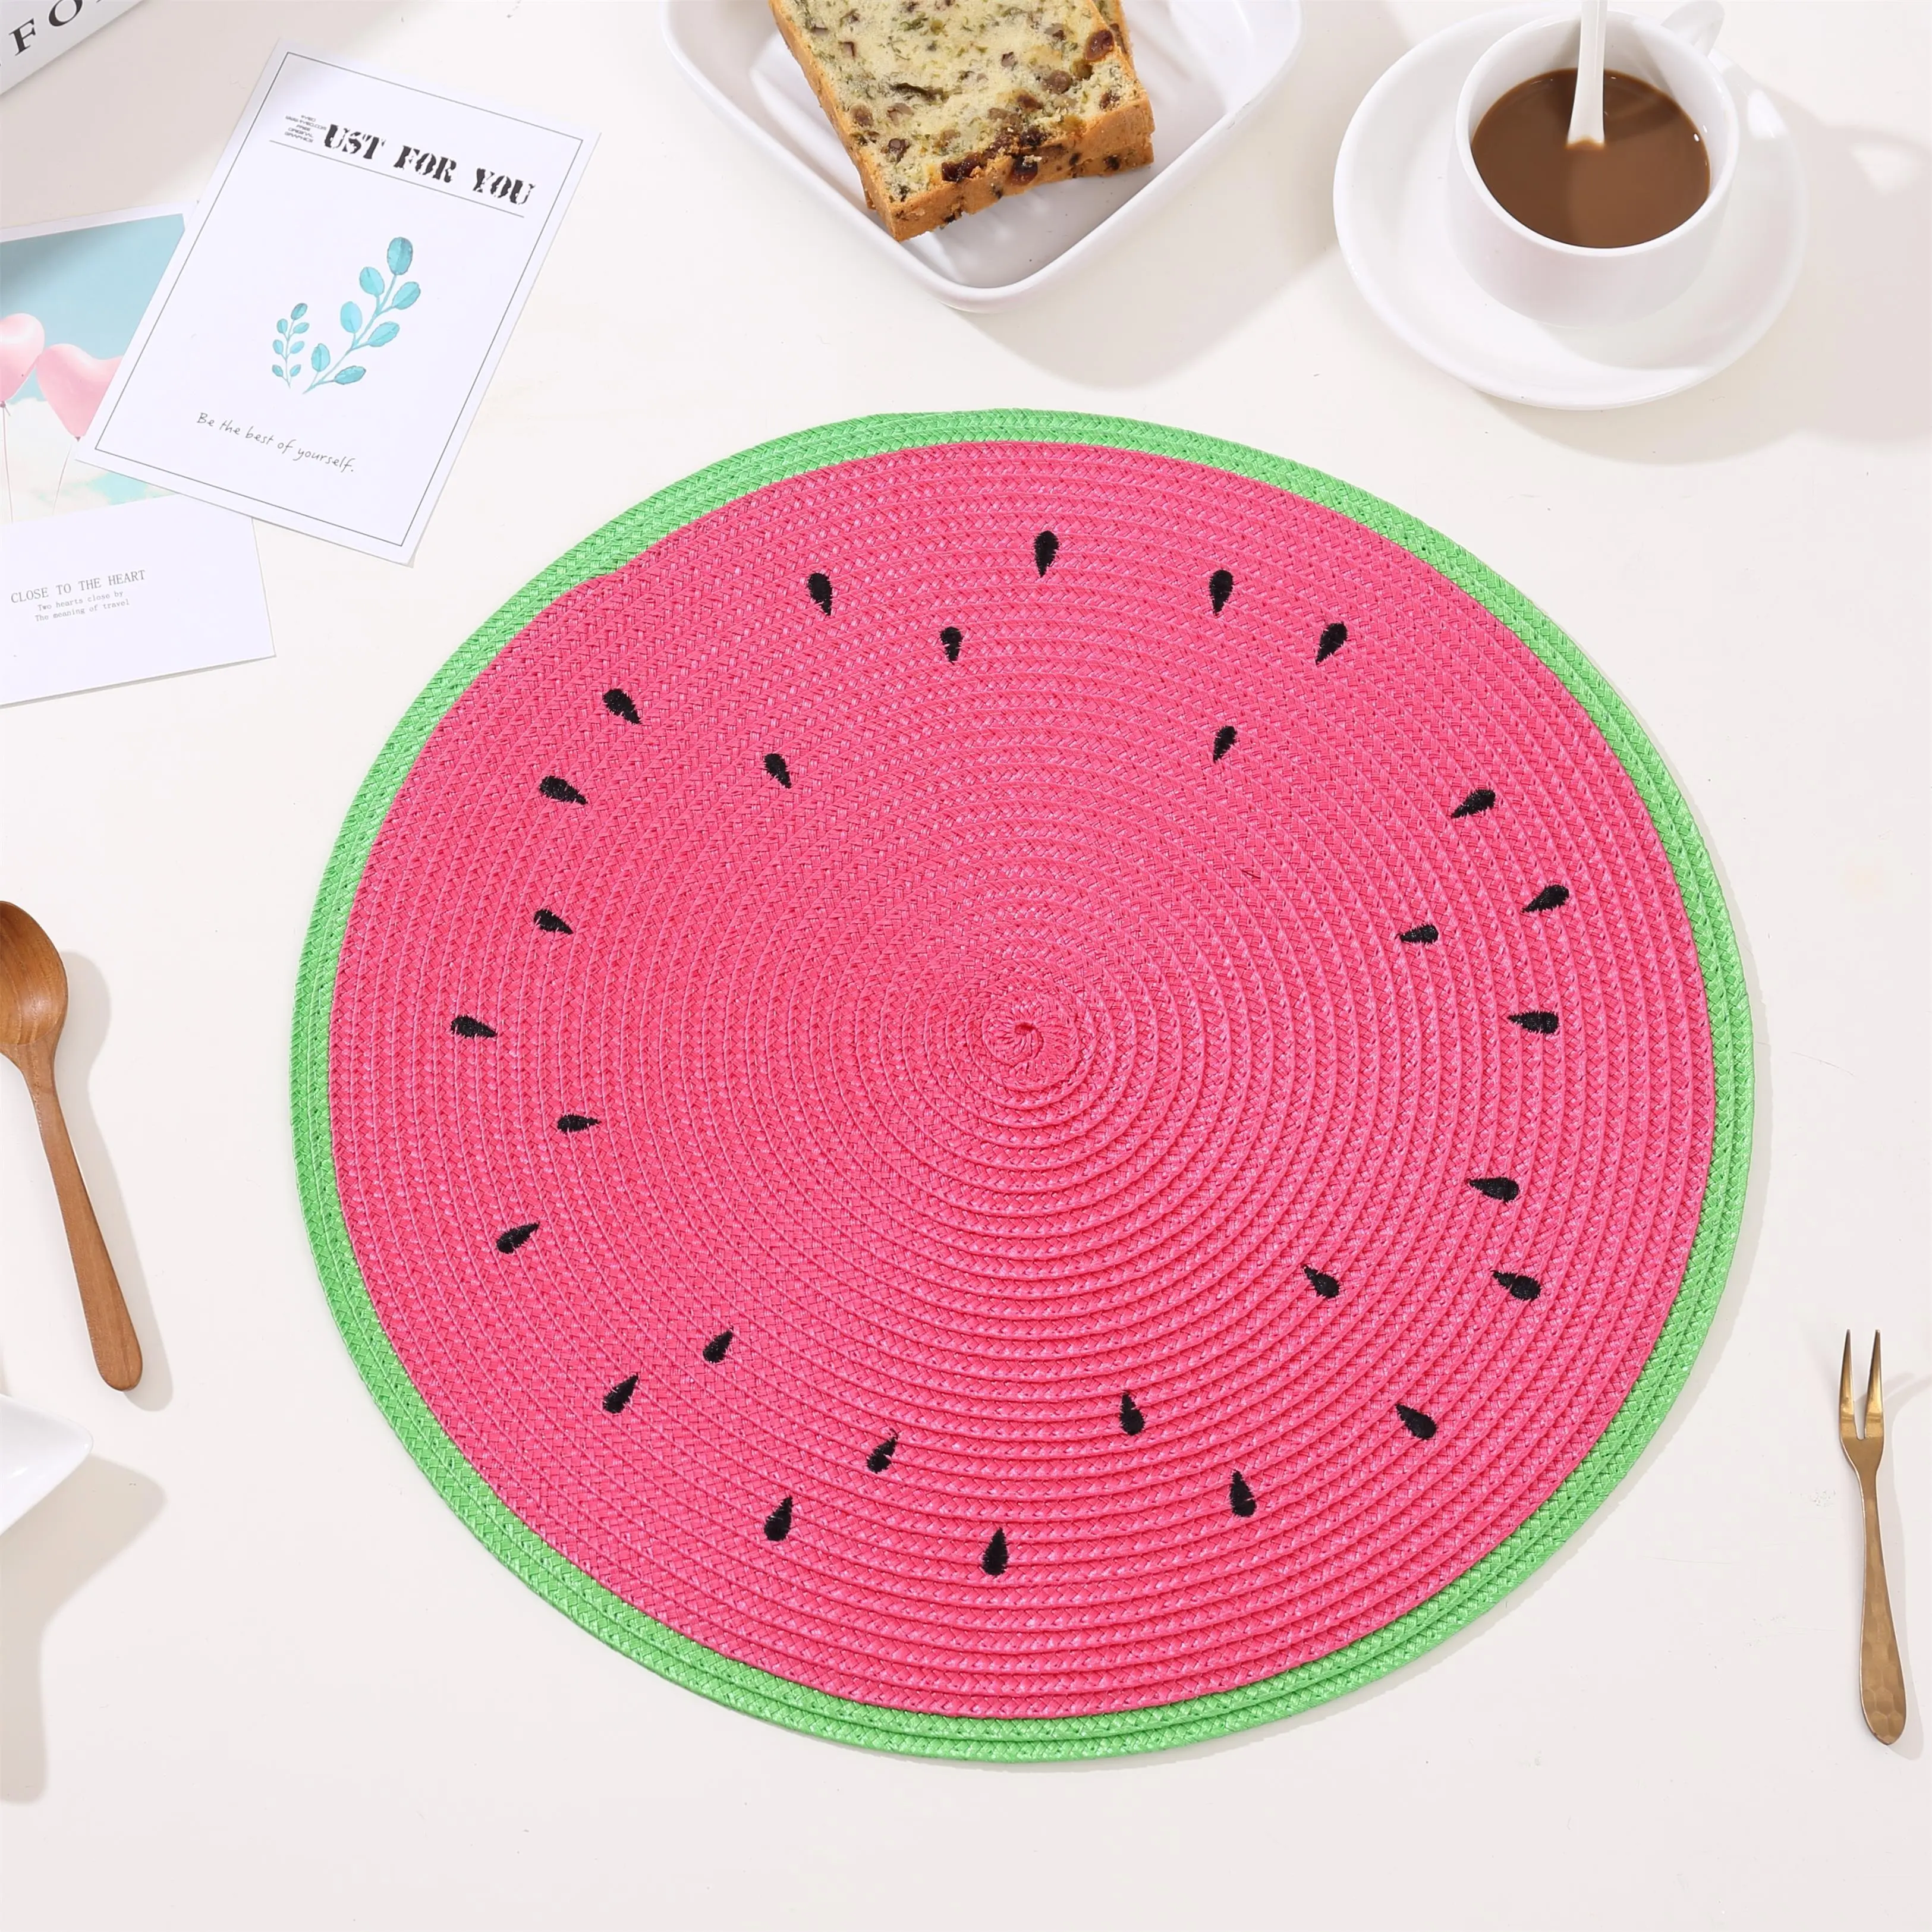 2022 new arrival Tabletex PP material embroidery fruit design washable round woven placemats wholesale